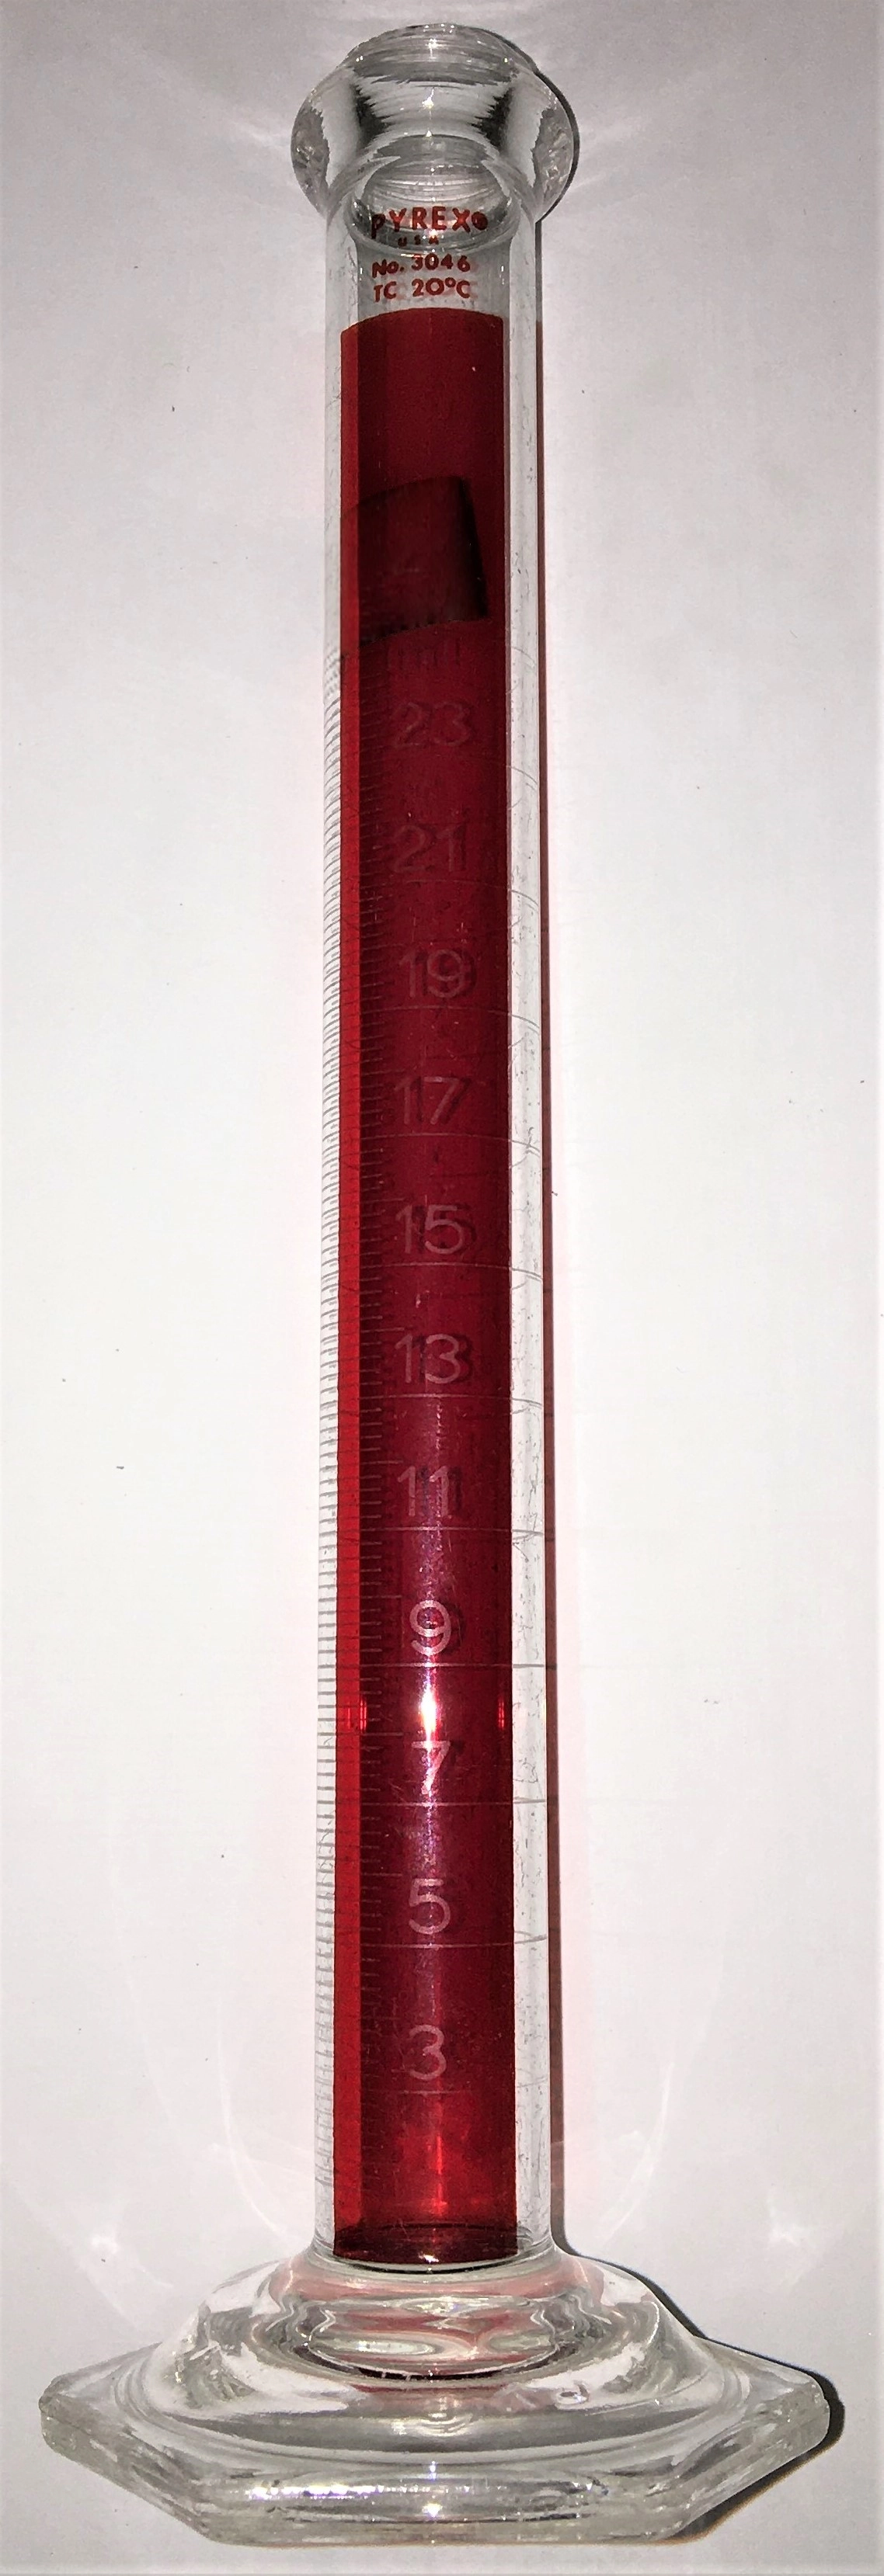 Corning PYREX 3046-25 Lifetime Red Graduated Cylinder with Beaded Rim (25mL)